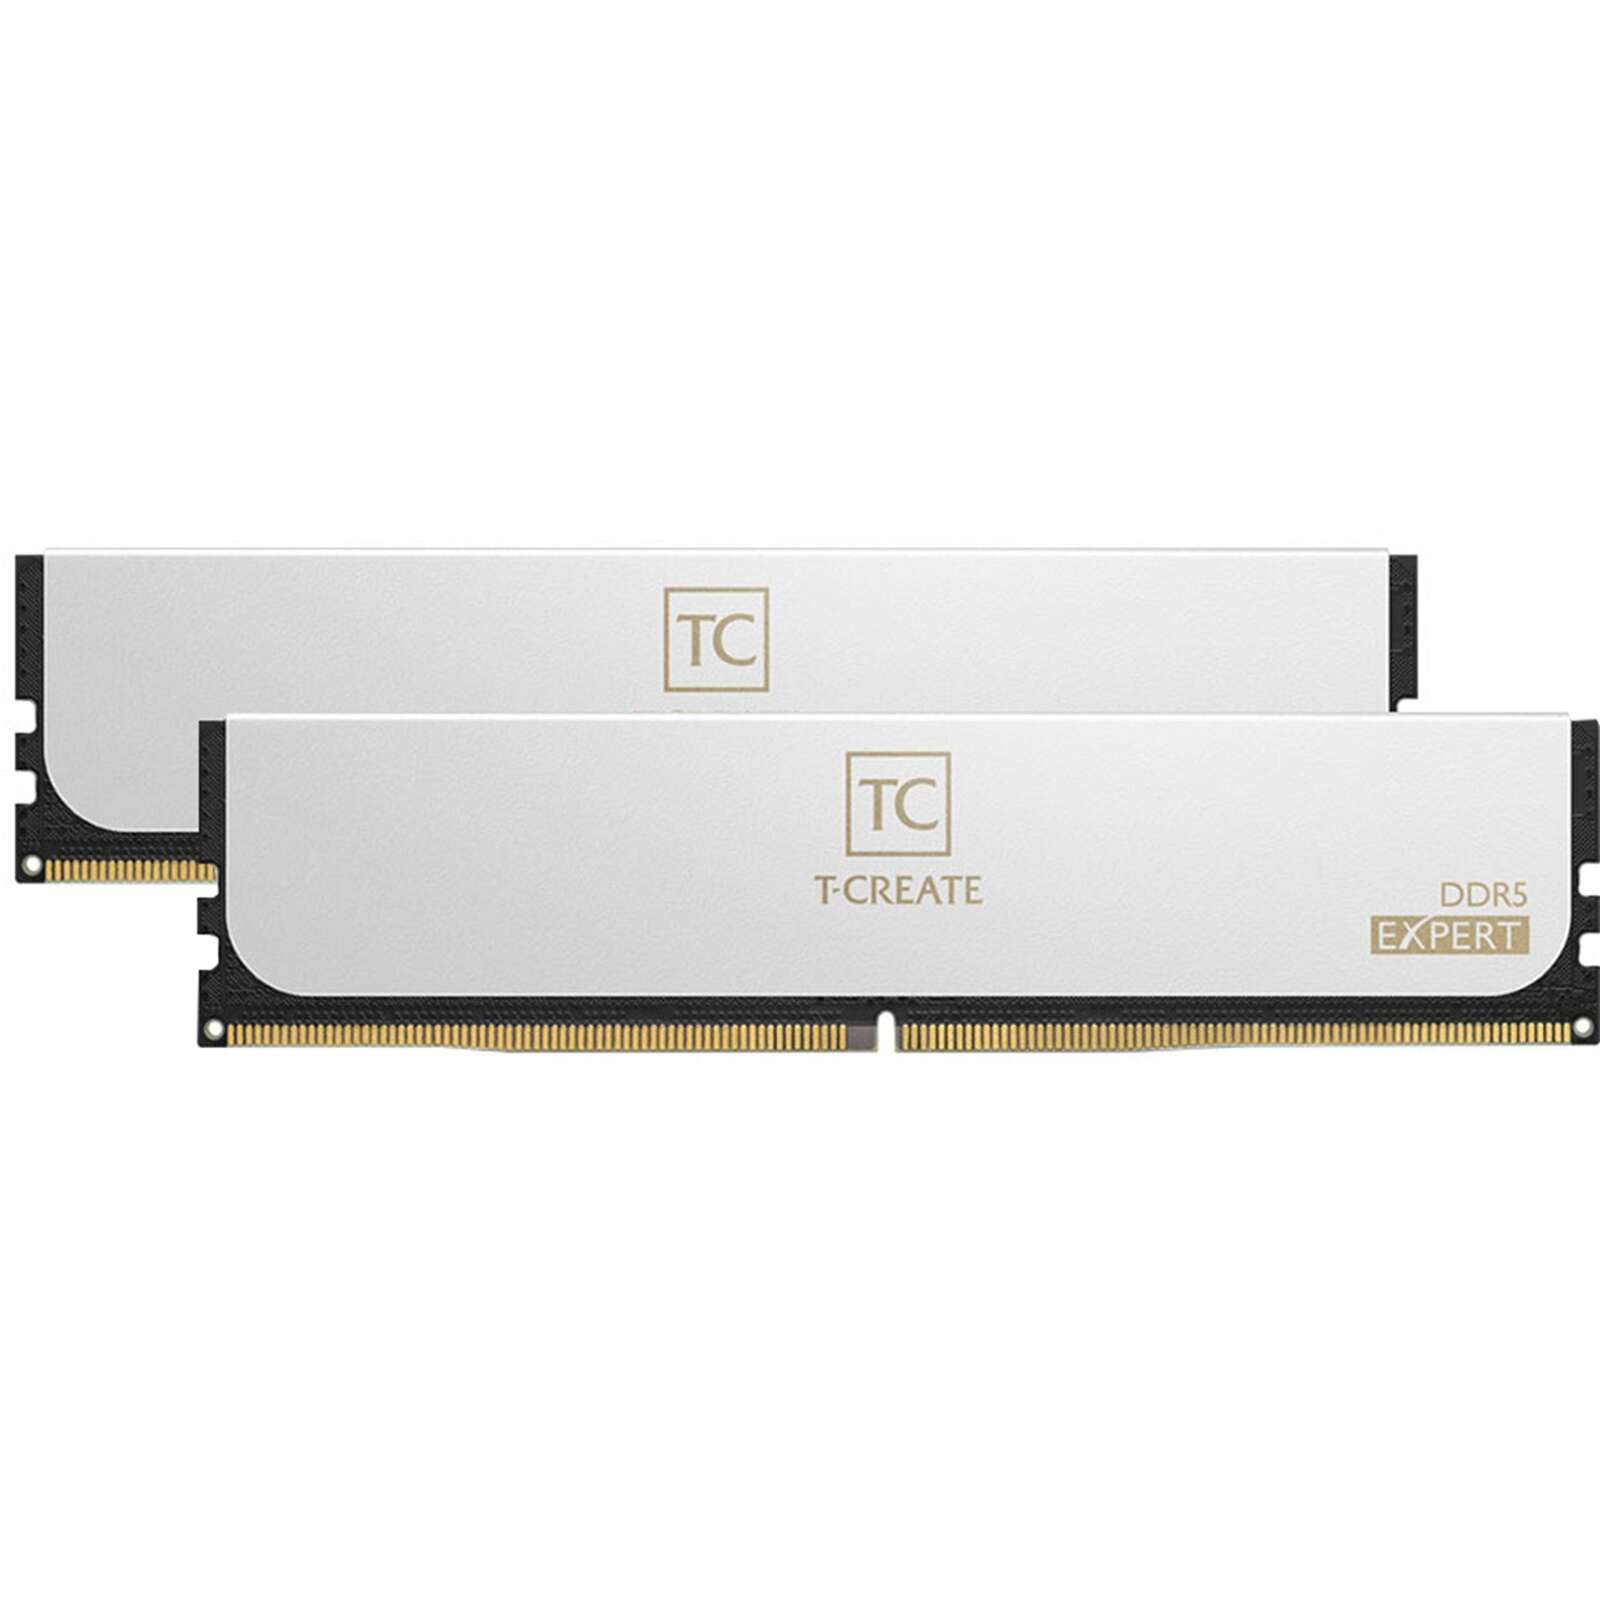 Teamgroup 64gb / 6000 t-create expert ddr5 ram kit (2x32gb) - feh...